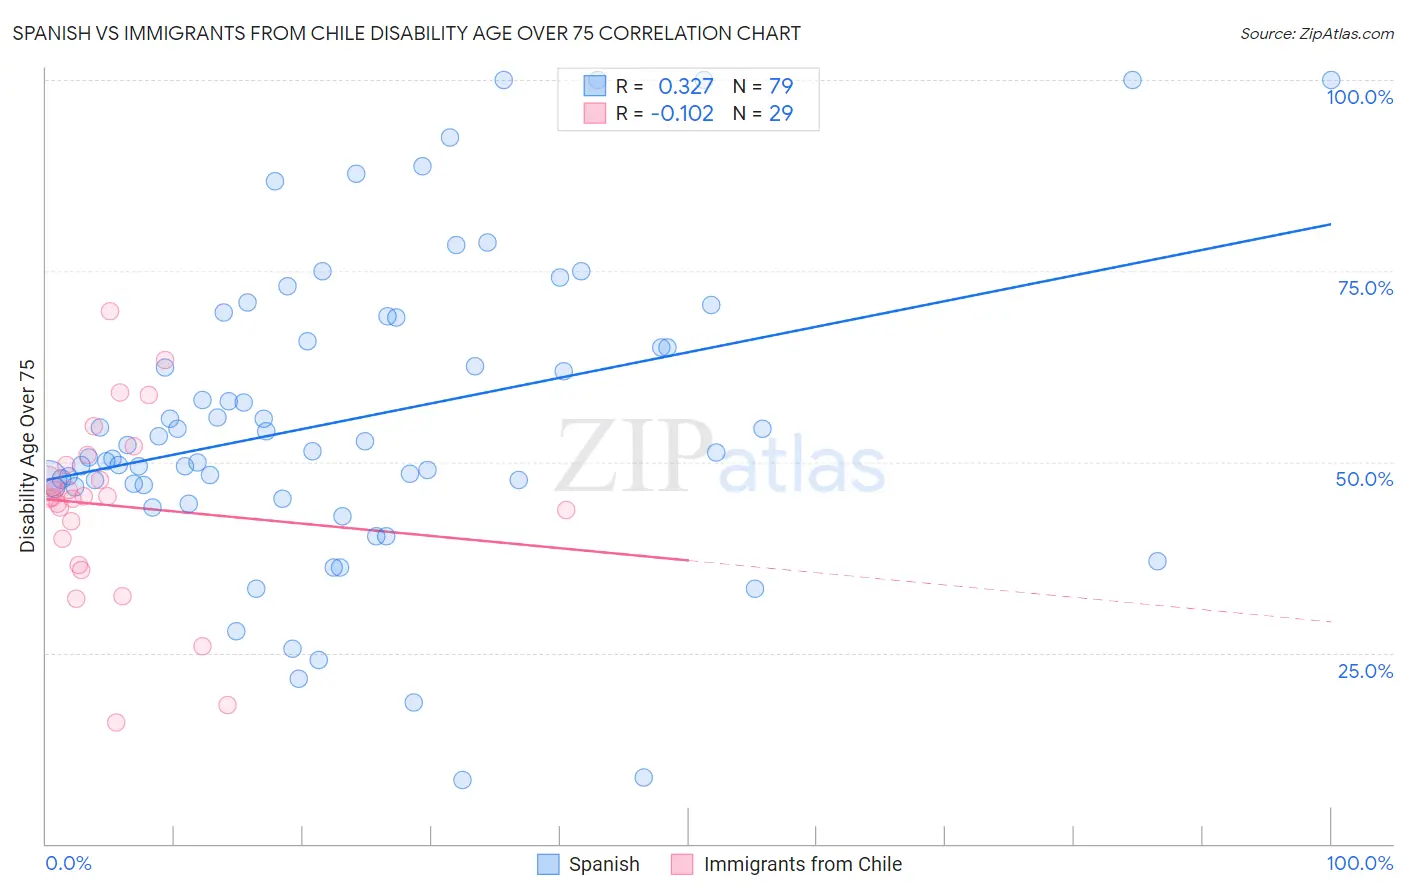 Spanish vs Immigrants from Chile Disability Age Over 75